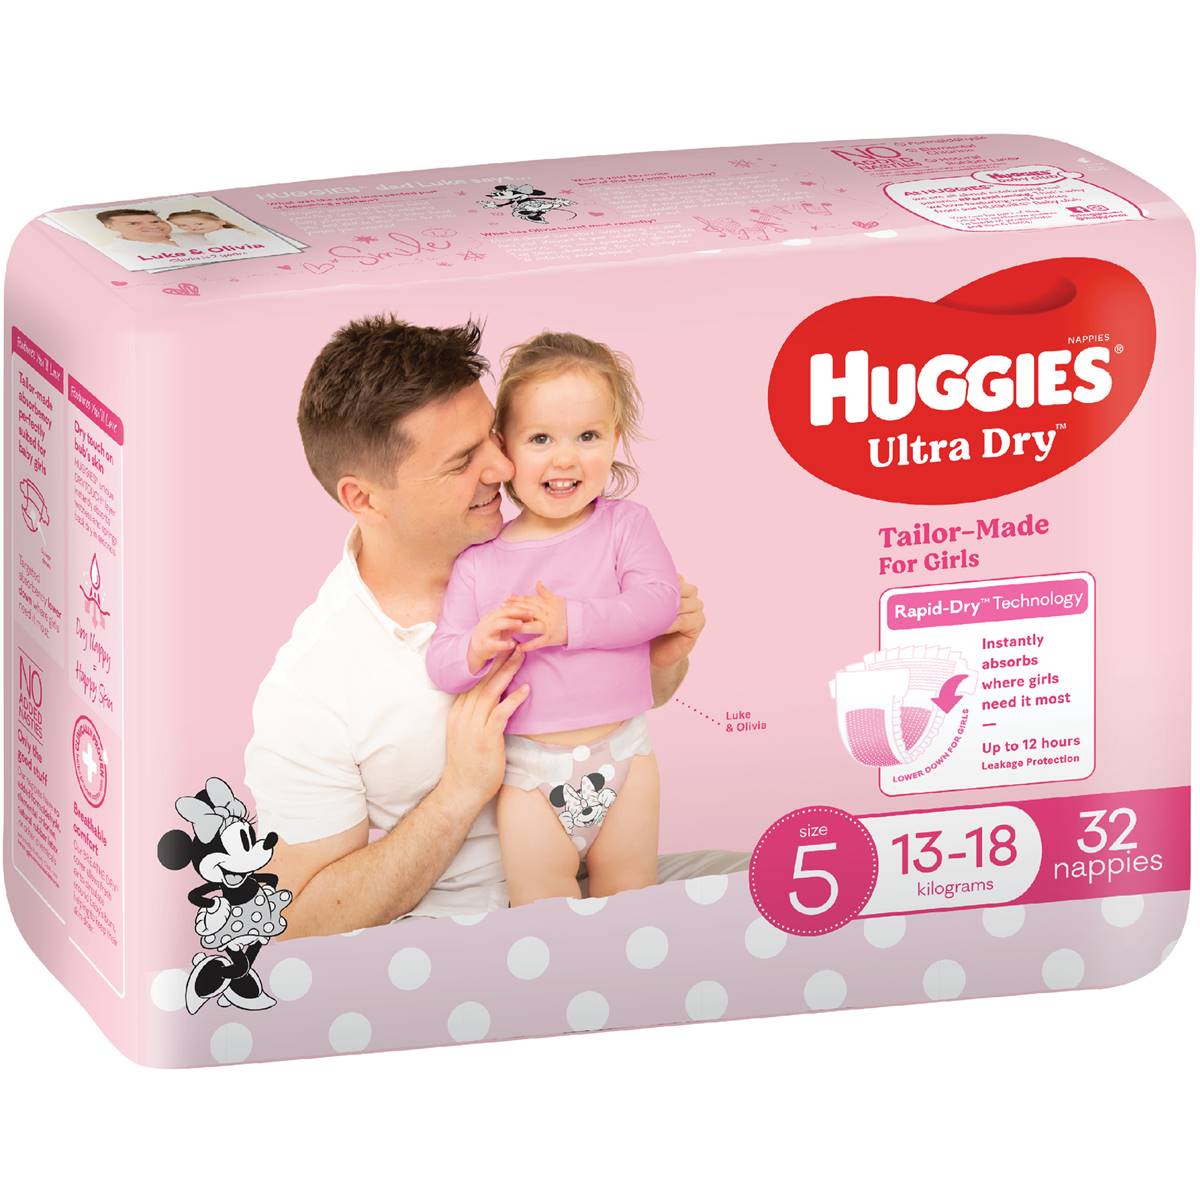 Huggies Ultra Dry Nappies Girls Size 5 (13-18kg) 32 Pack